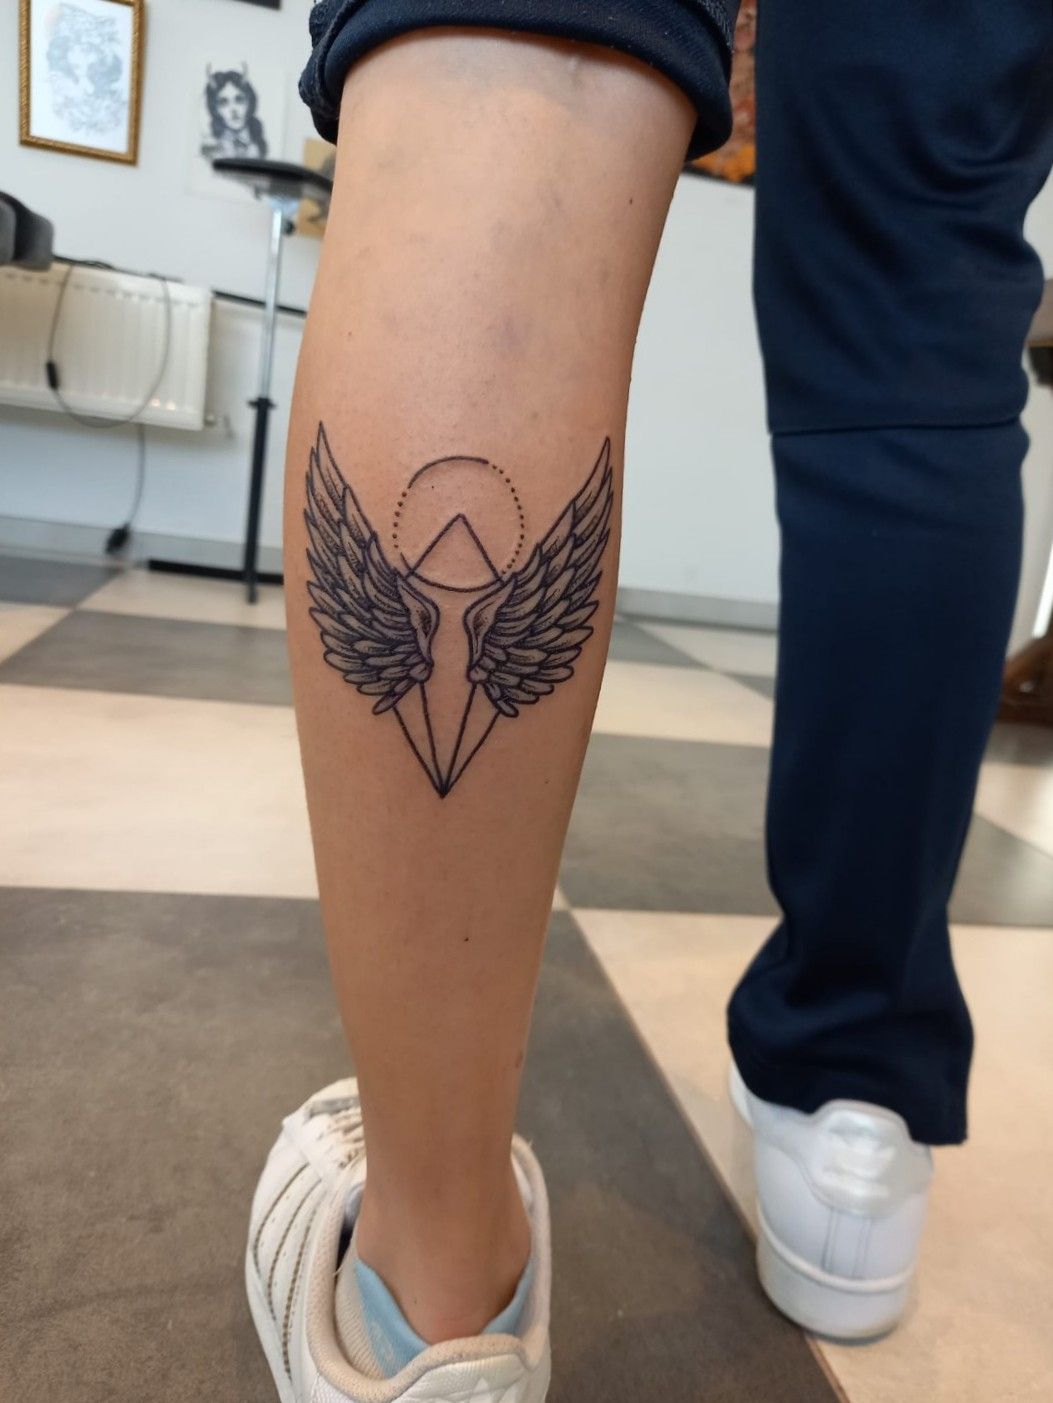 NEW TATTOO ALERT x 3! 1) Knicks will always be my one and only true love  @nyknicks 2) the shoe with wings to signify my life anthem #ru... |  Instagram